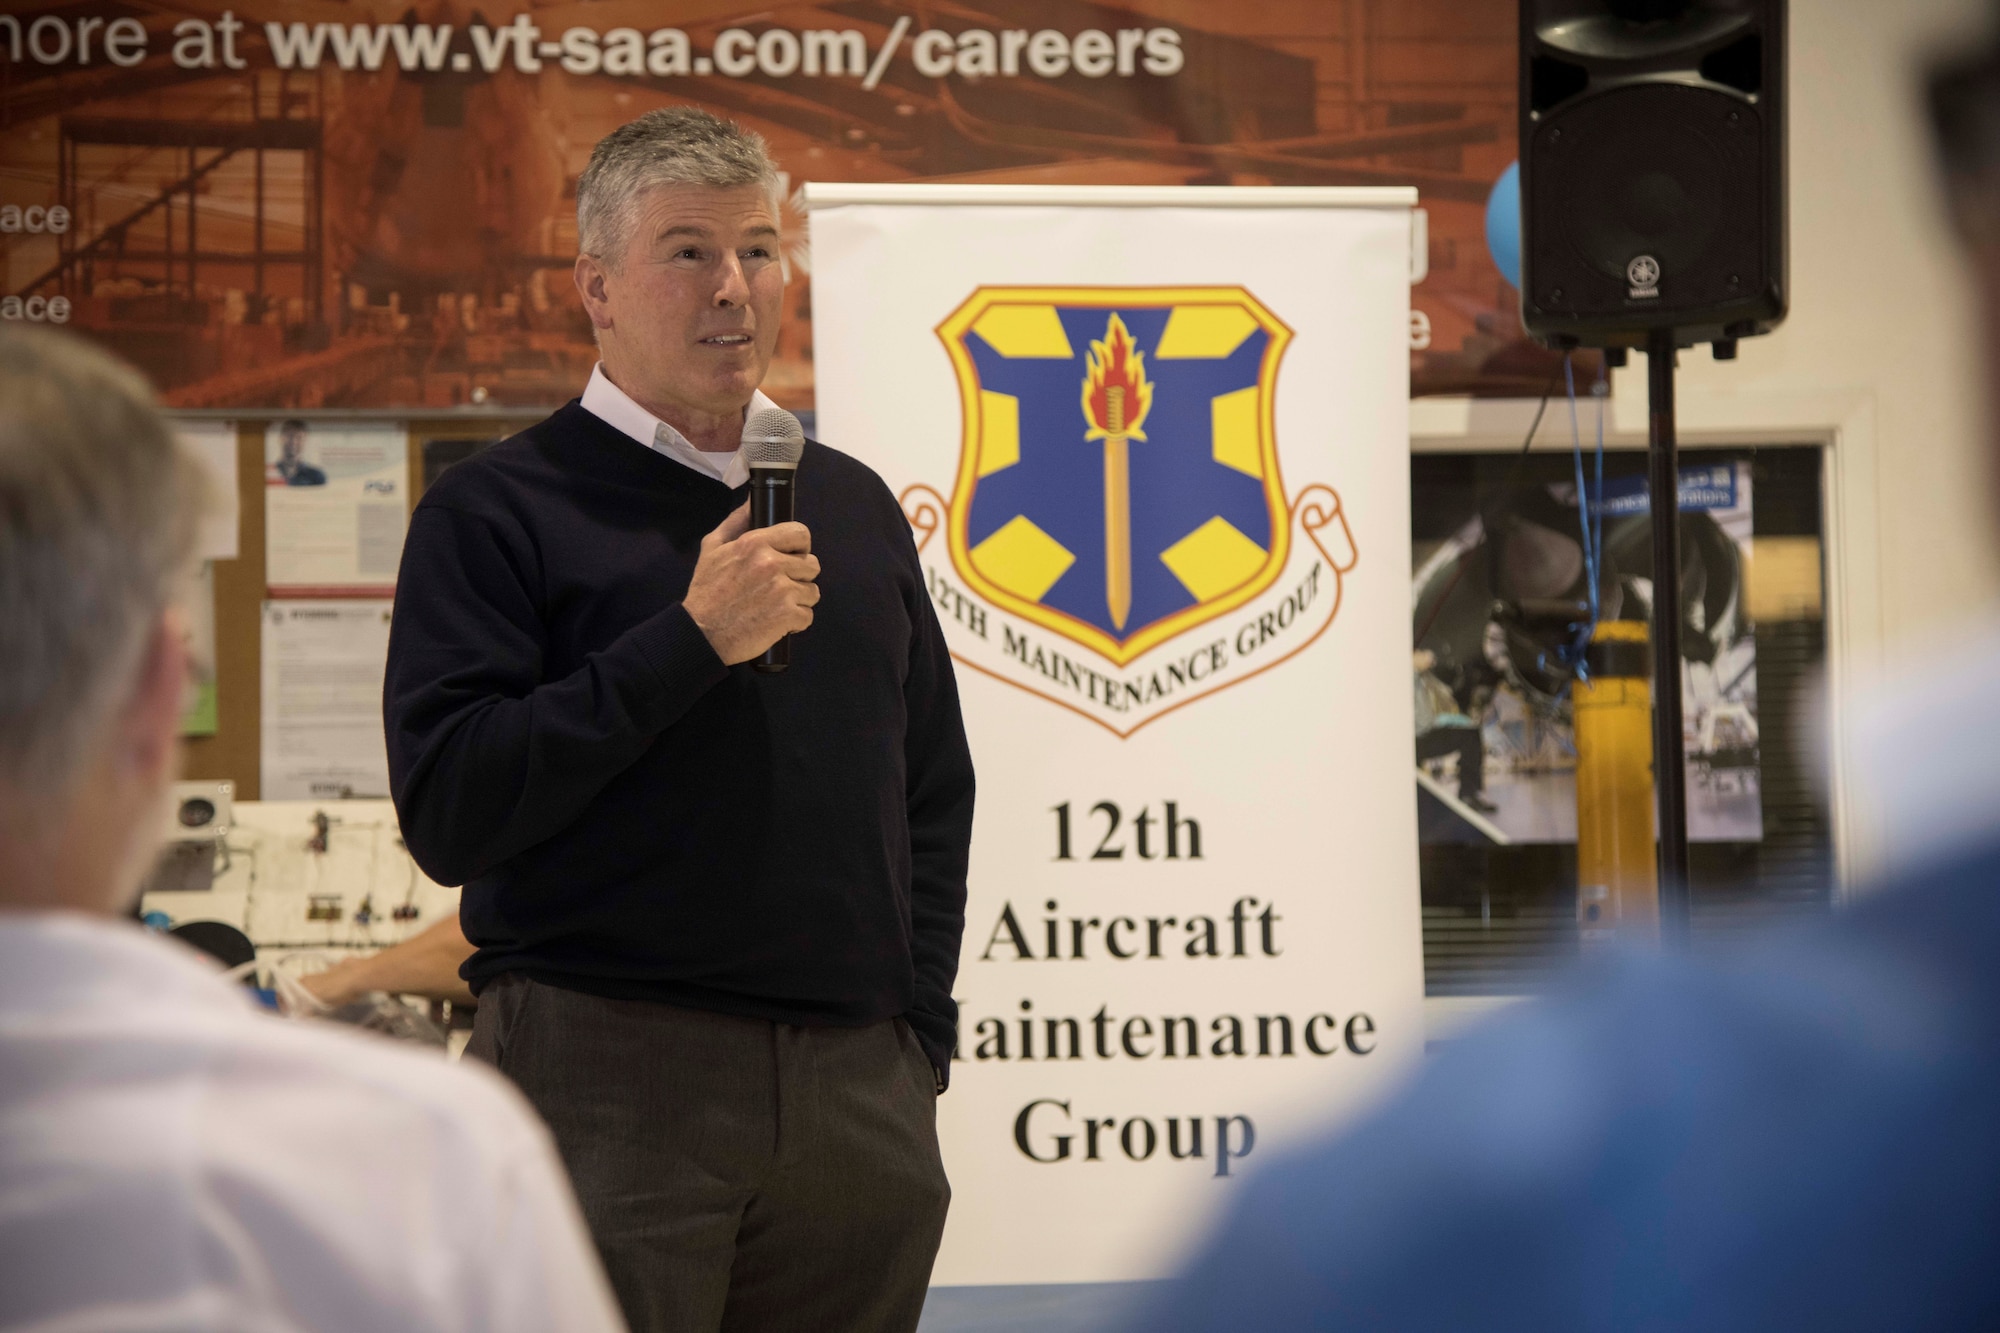 Robert J. West, 12th Maintenance Group director of maintenance, discusses the 12th MXG mission and welcomes the group’s seven new hires at the Hallmark University College of Aeronautics graduation ceremony Jan. 23, 2020. These hires were a direct result of the 12th MXG’s push for recruitment and new employees for the upcoming missions slated for JBSA-Randolph.